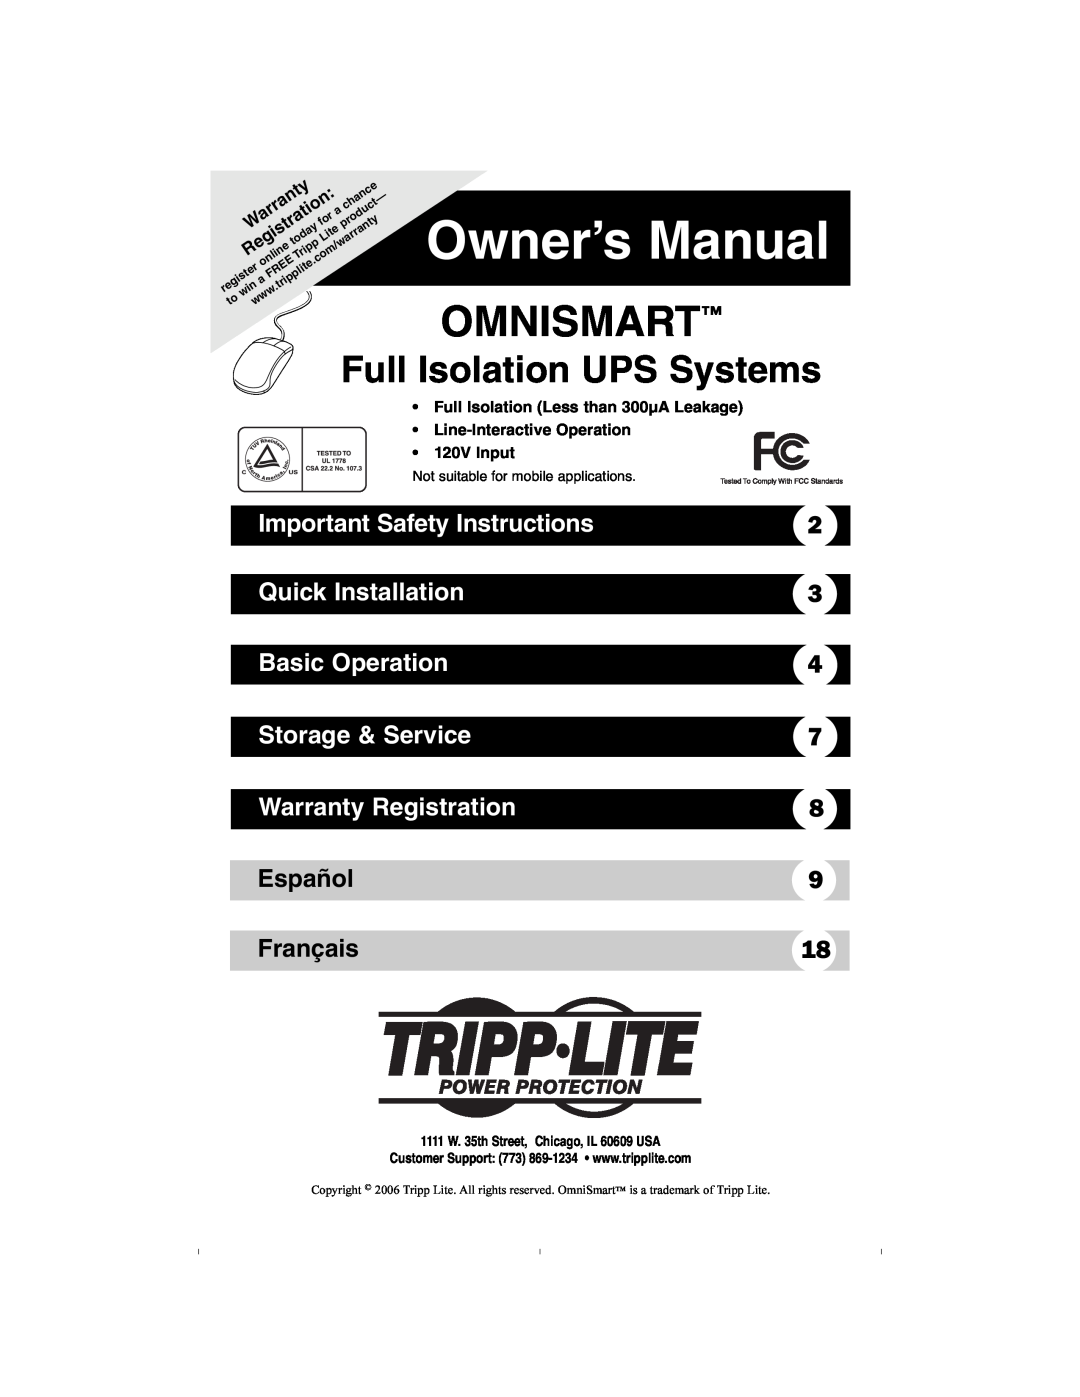 Tripp Lite OMNI500ISO owner manual Important Safety Instructions, Quick Installation, Basic Operation, Storage & Service 